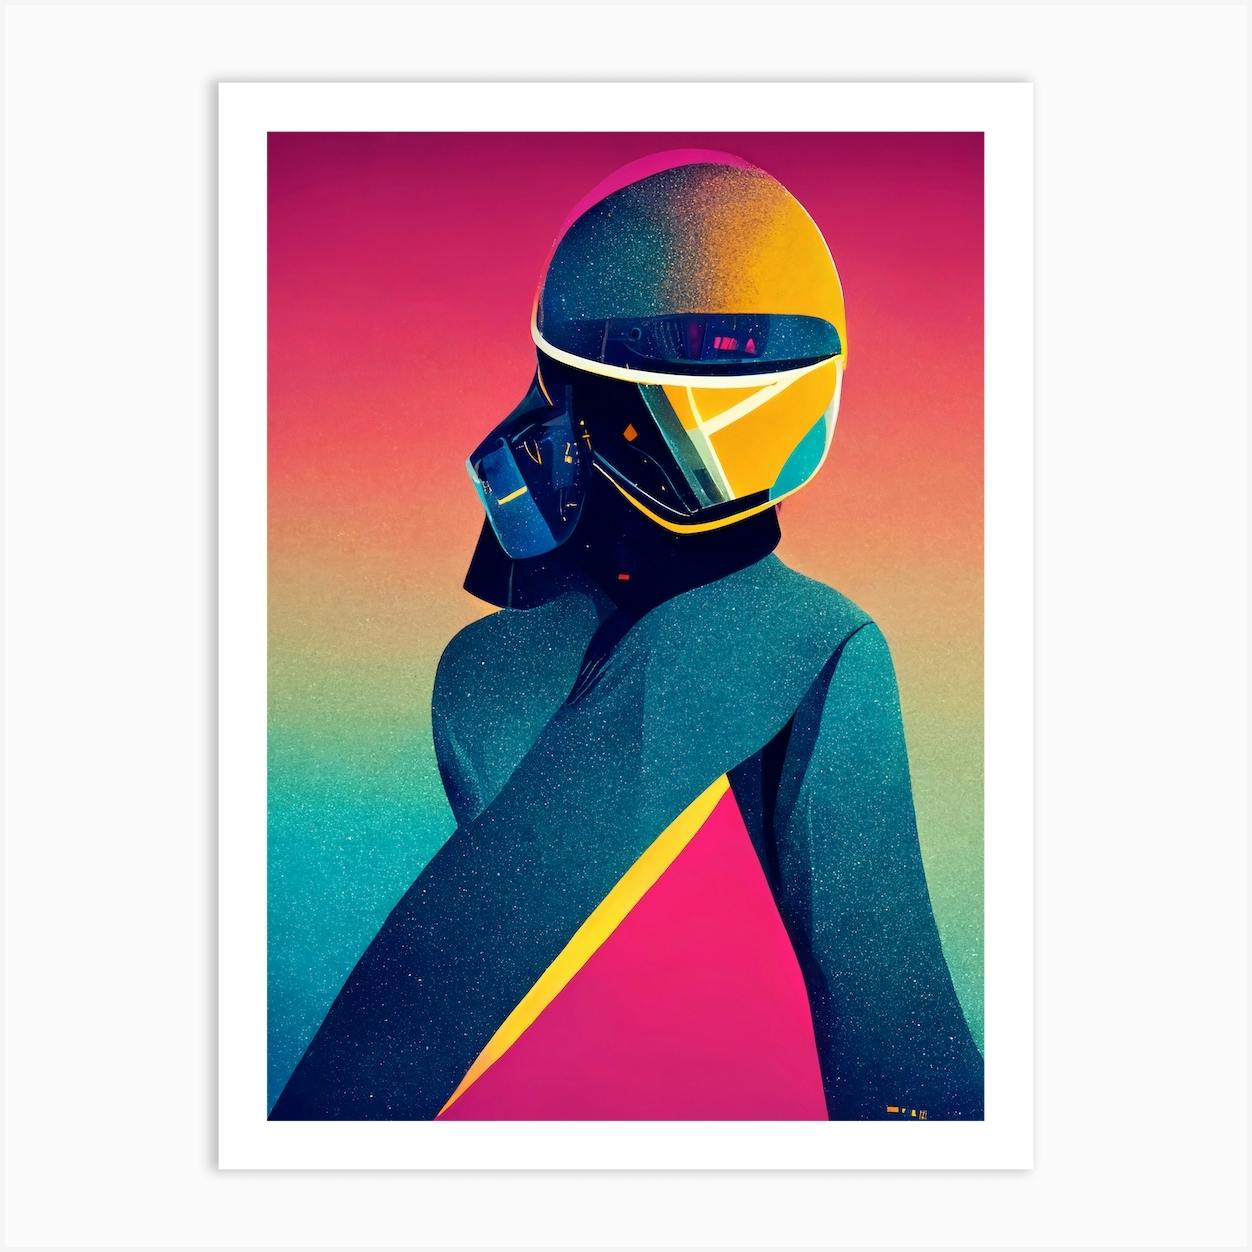 The Daft Punk Rock Music Band Poster High Quality Printed Painting Retro  Poster Home Decor Art ZRPL# From Walmarts, $22.7 | DHgate.Com